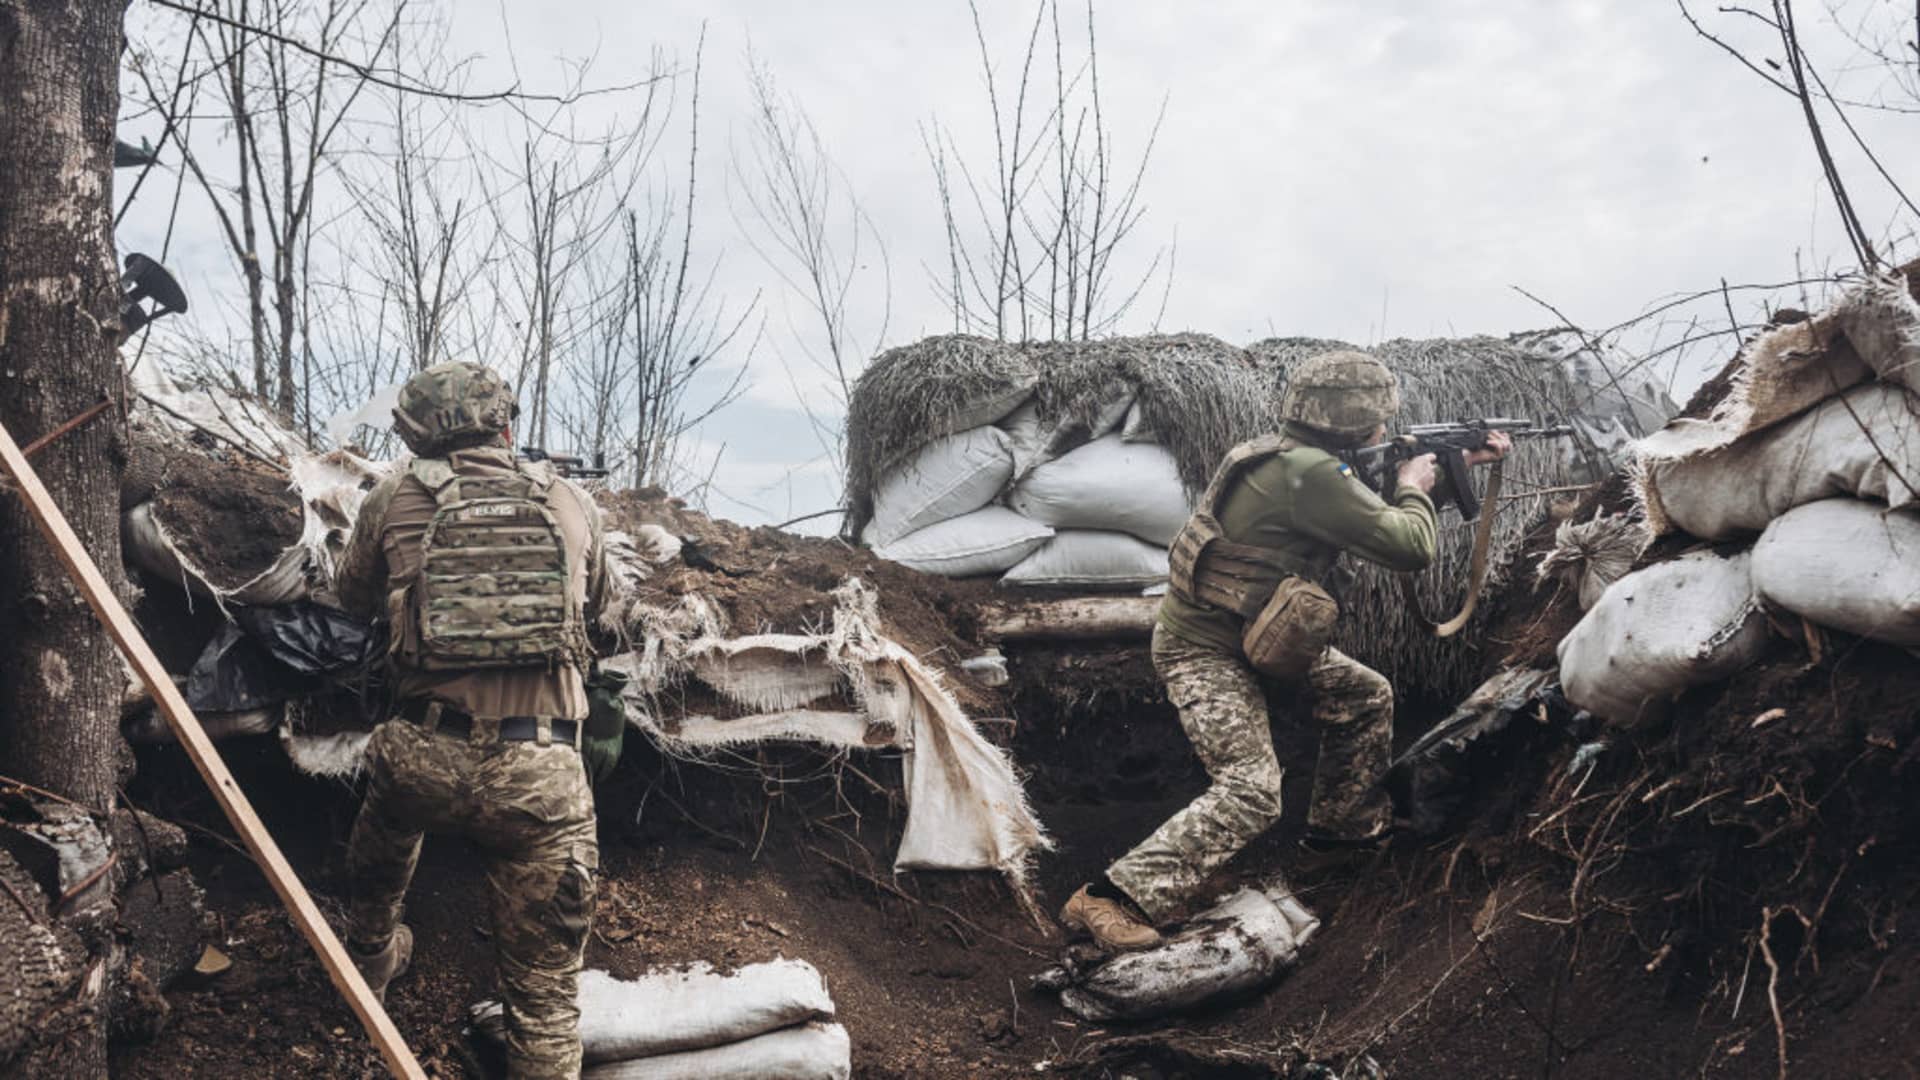 Ukrainian soldiers take aim from their frontline position in eastern Ukraine, on April 11, 2022.